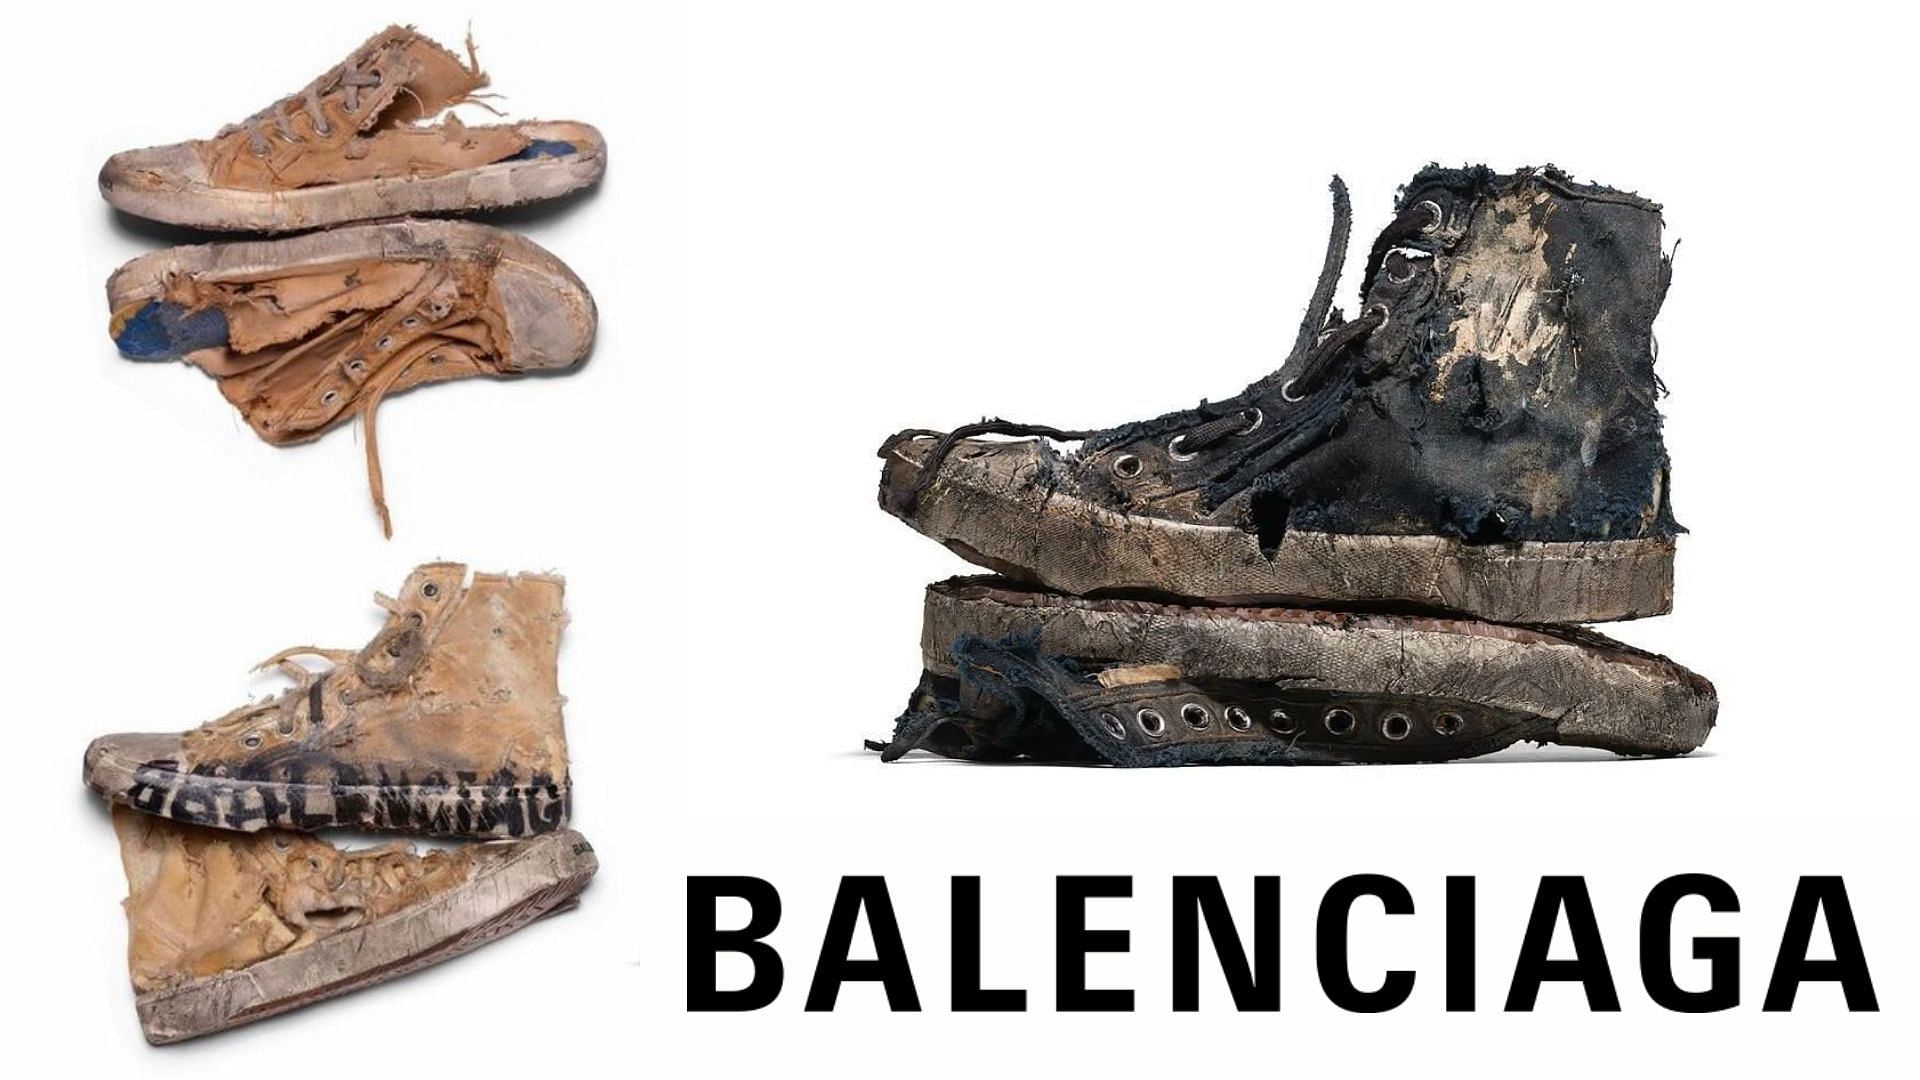 3 most trolled Balenciaga items and their prices